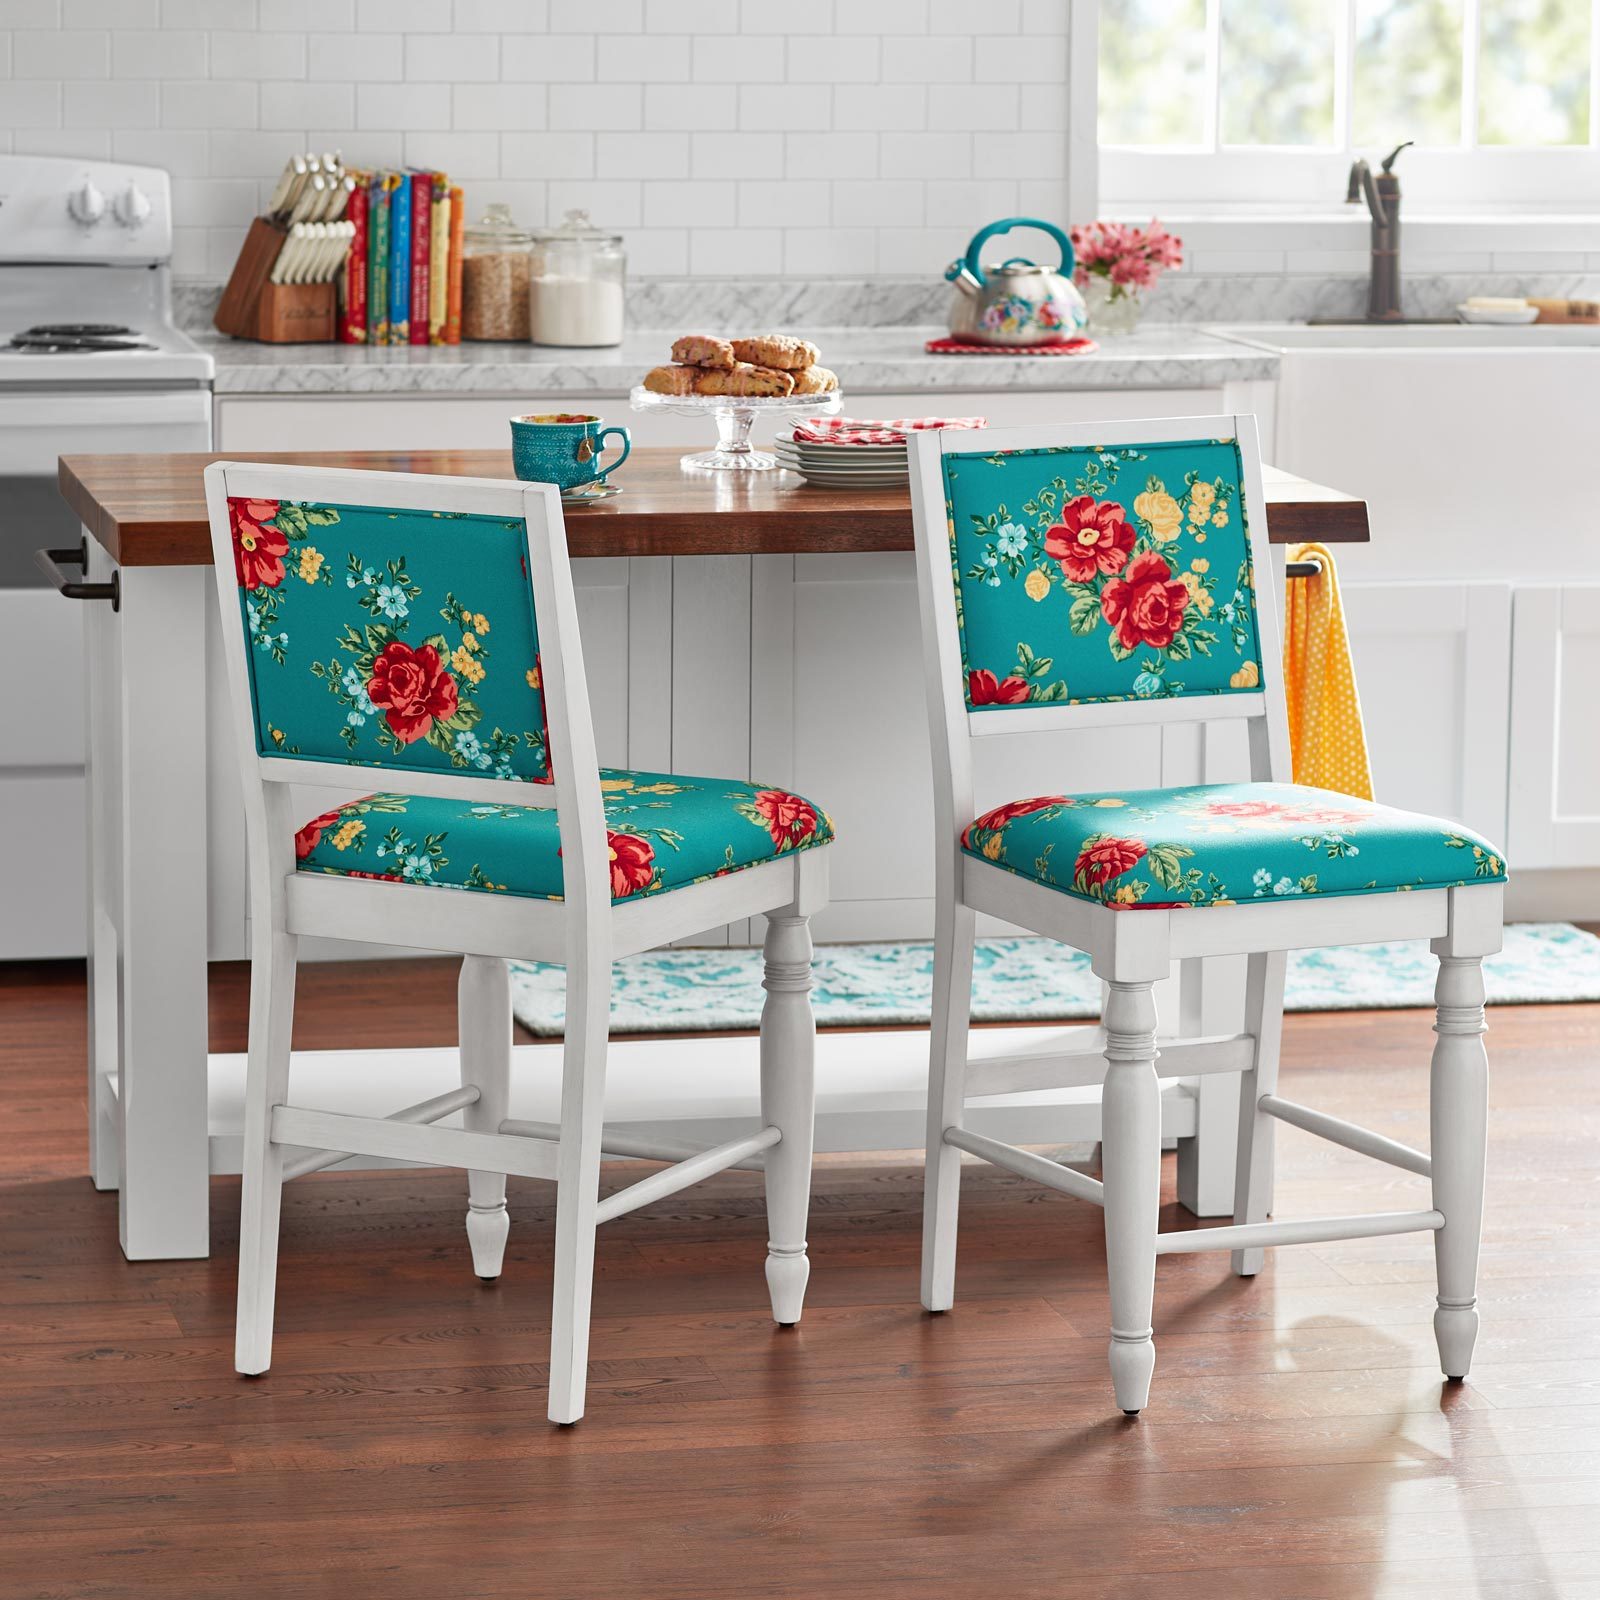 https://www.tasteofhome.com/wp-content/uploads/2023/06/TOH-ecomm-Pioneer-Woman-Furniture-counter-stools-courtesy-walmart.jpg?fit=700%2C700